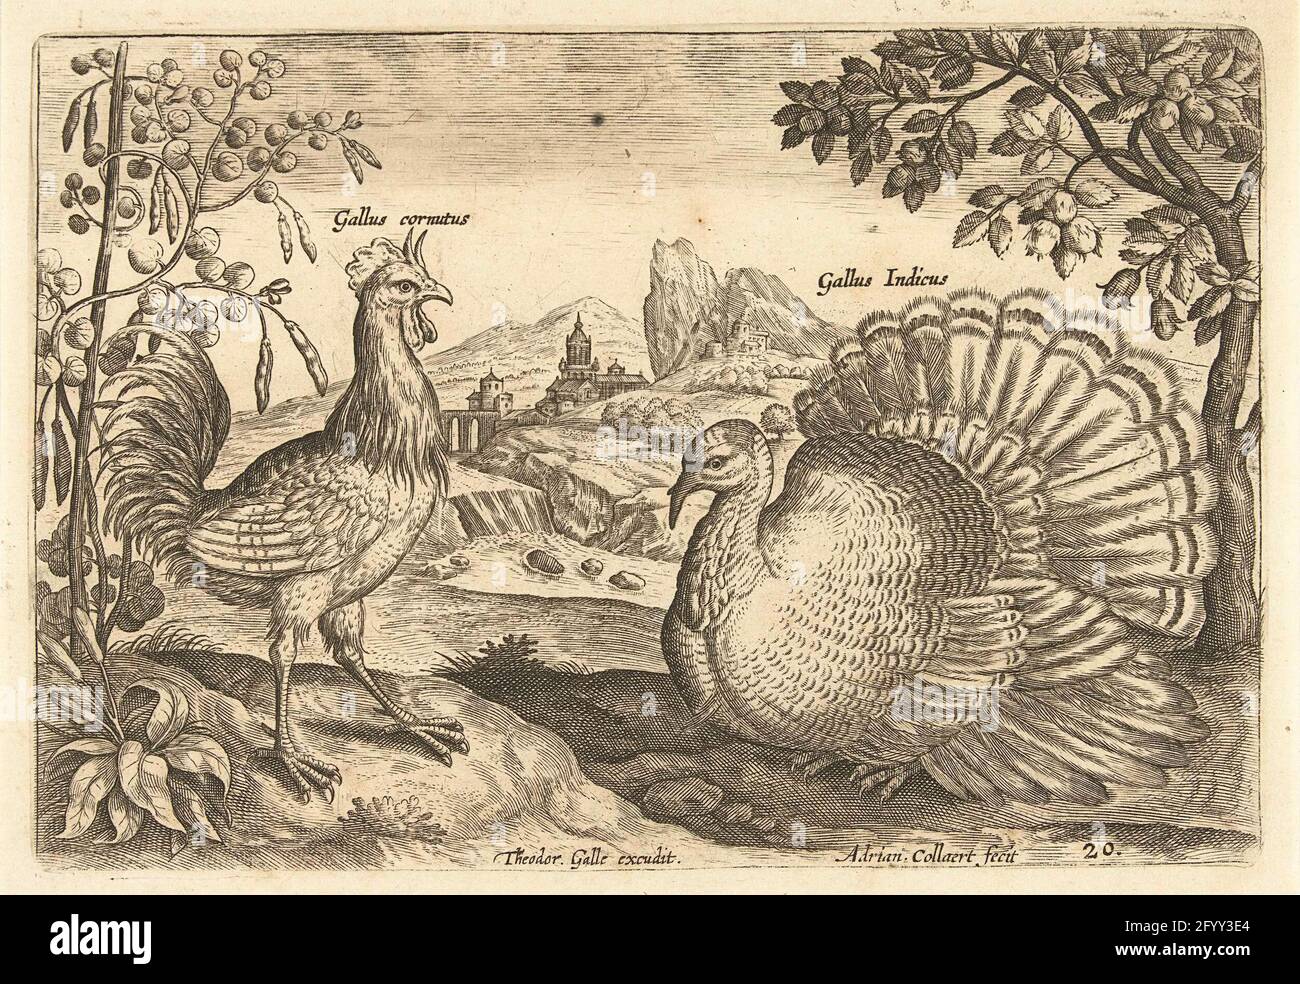 Two prain in a landscape; AvIVM Vivae; Birds. A rooster and turkey in a landscape with a waterfall. The print is part of a series of birds as subject. Stock Photo